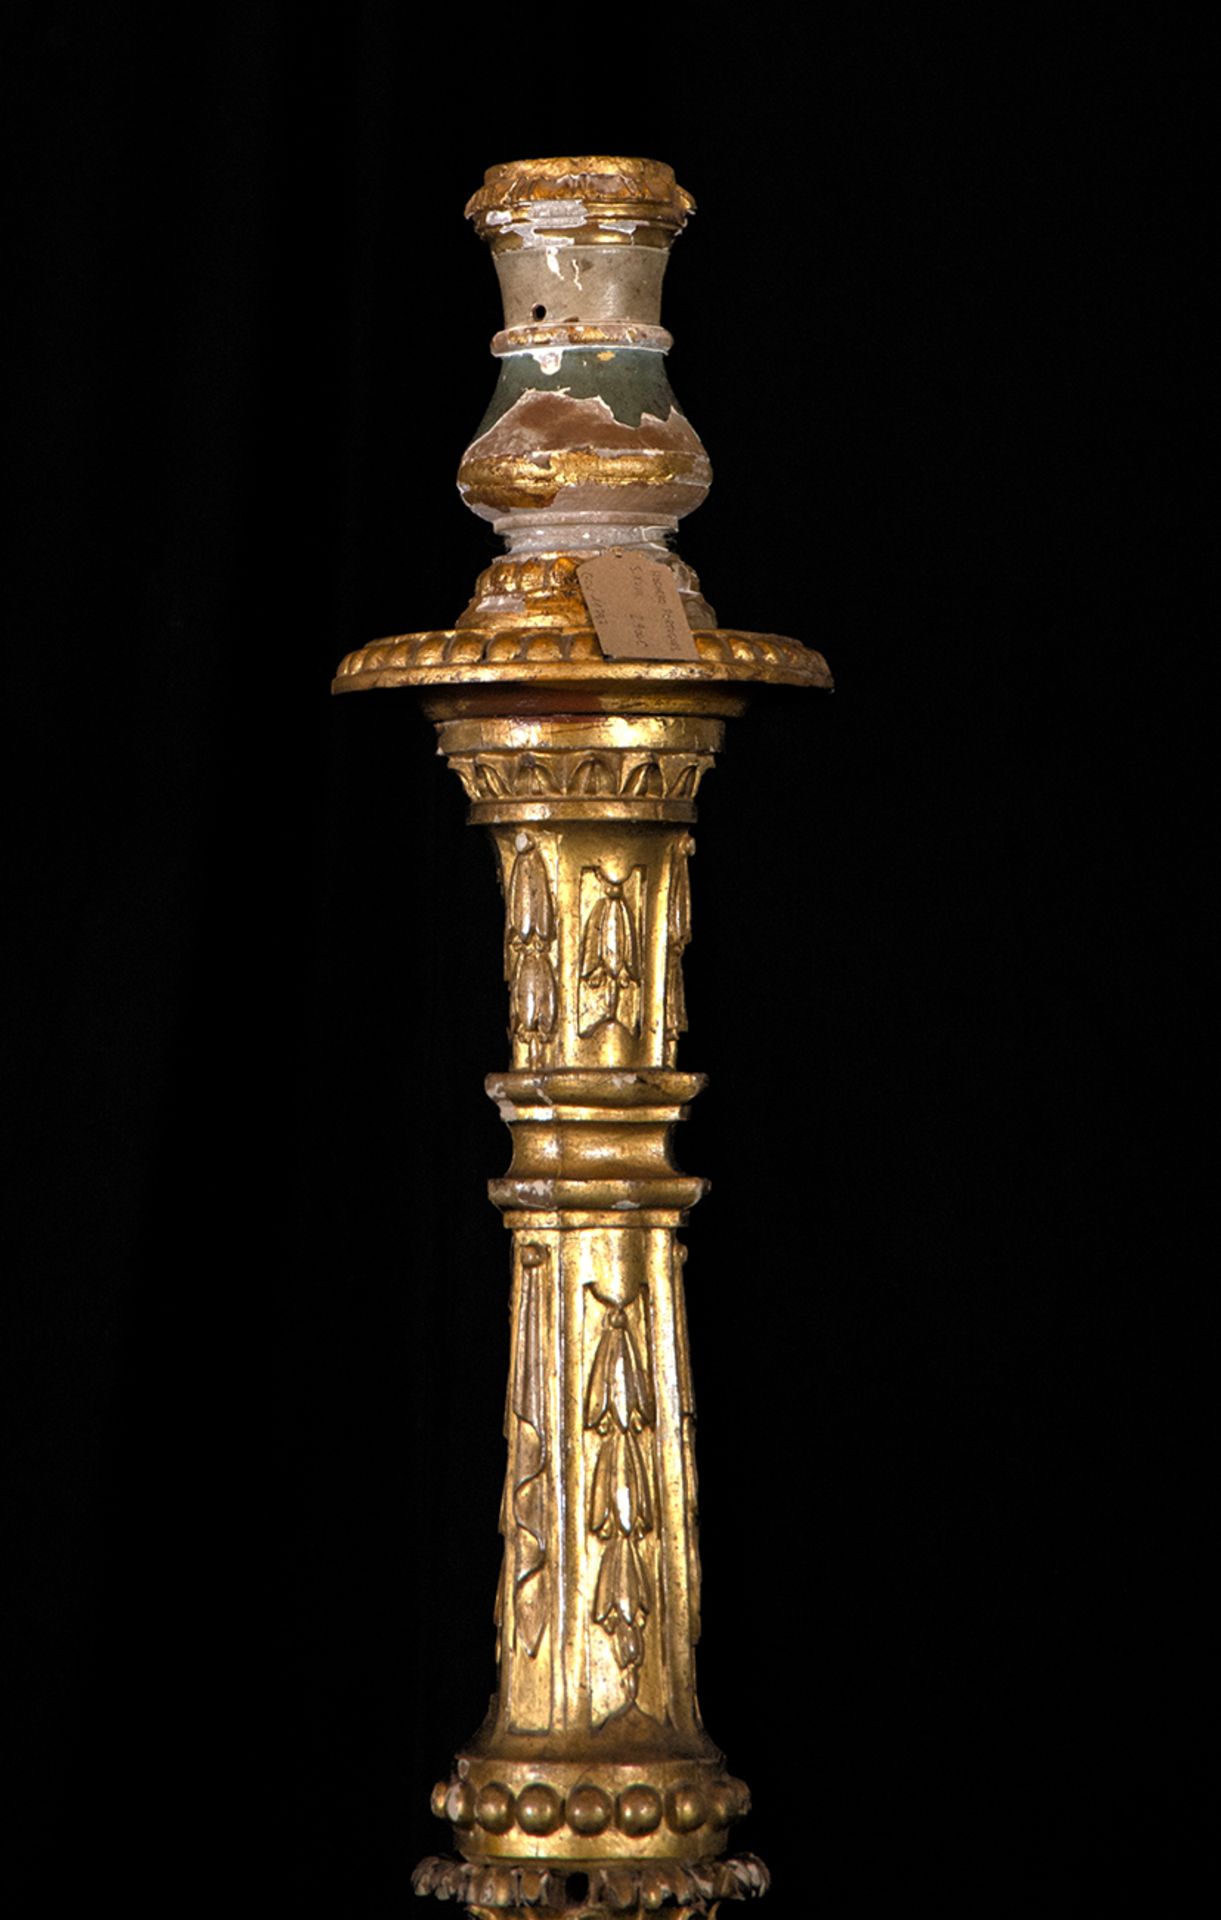 Large Portuguese torch holder in gilded wood, 18th century - Image 7 of 7